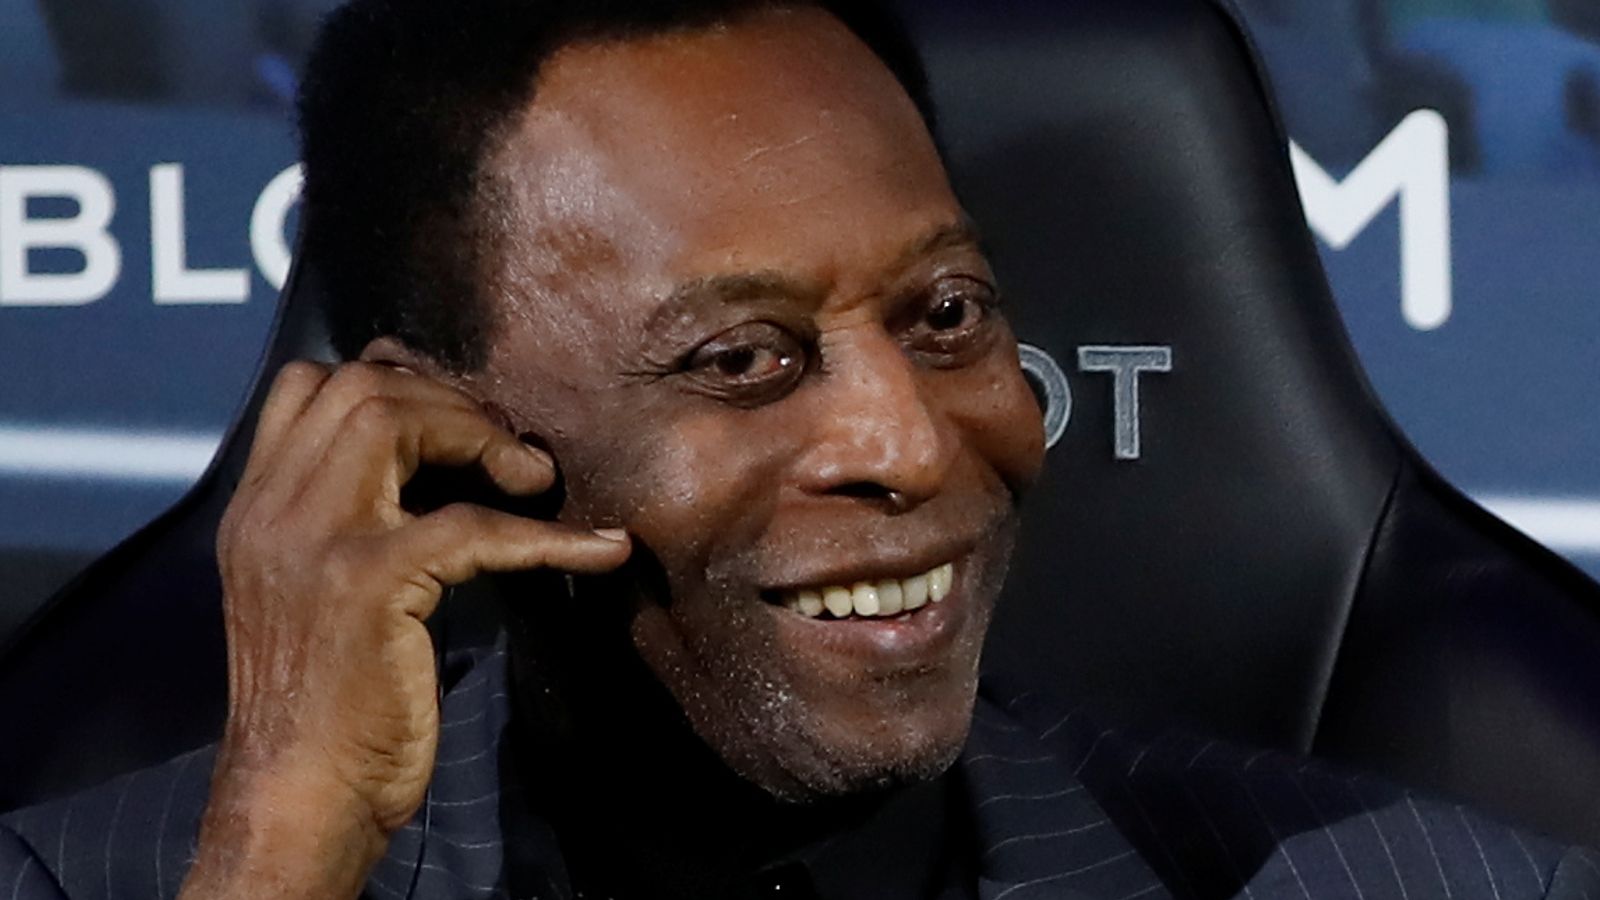 Pele thanks fans from hospital - as Qatar building lit up with 'get well soon'